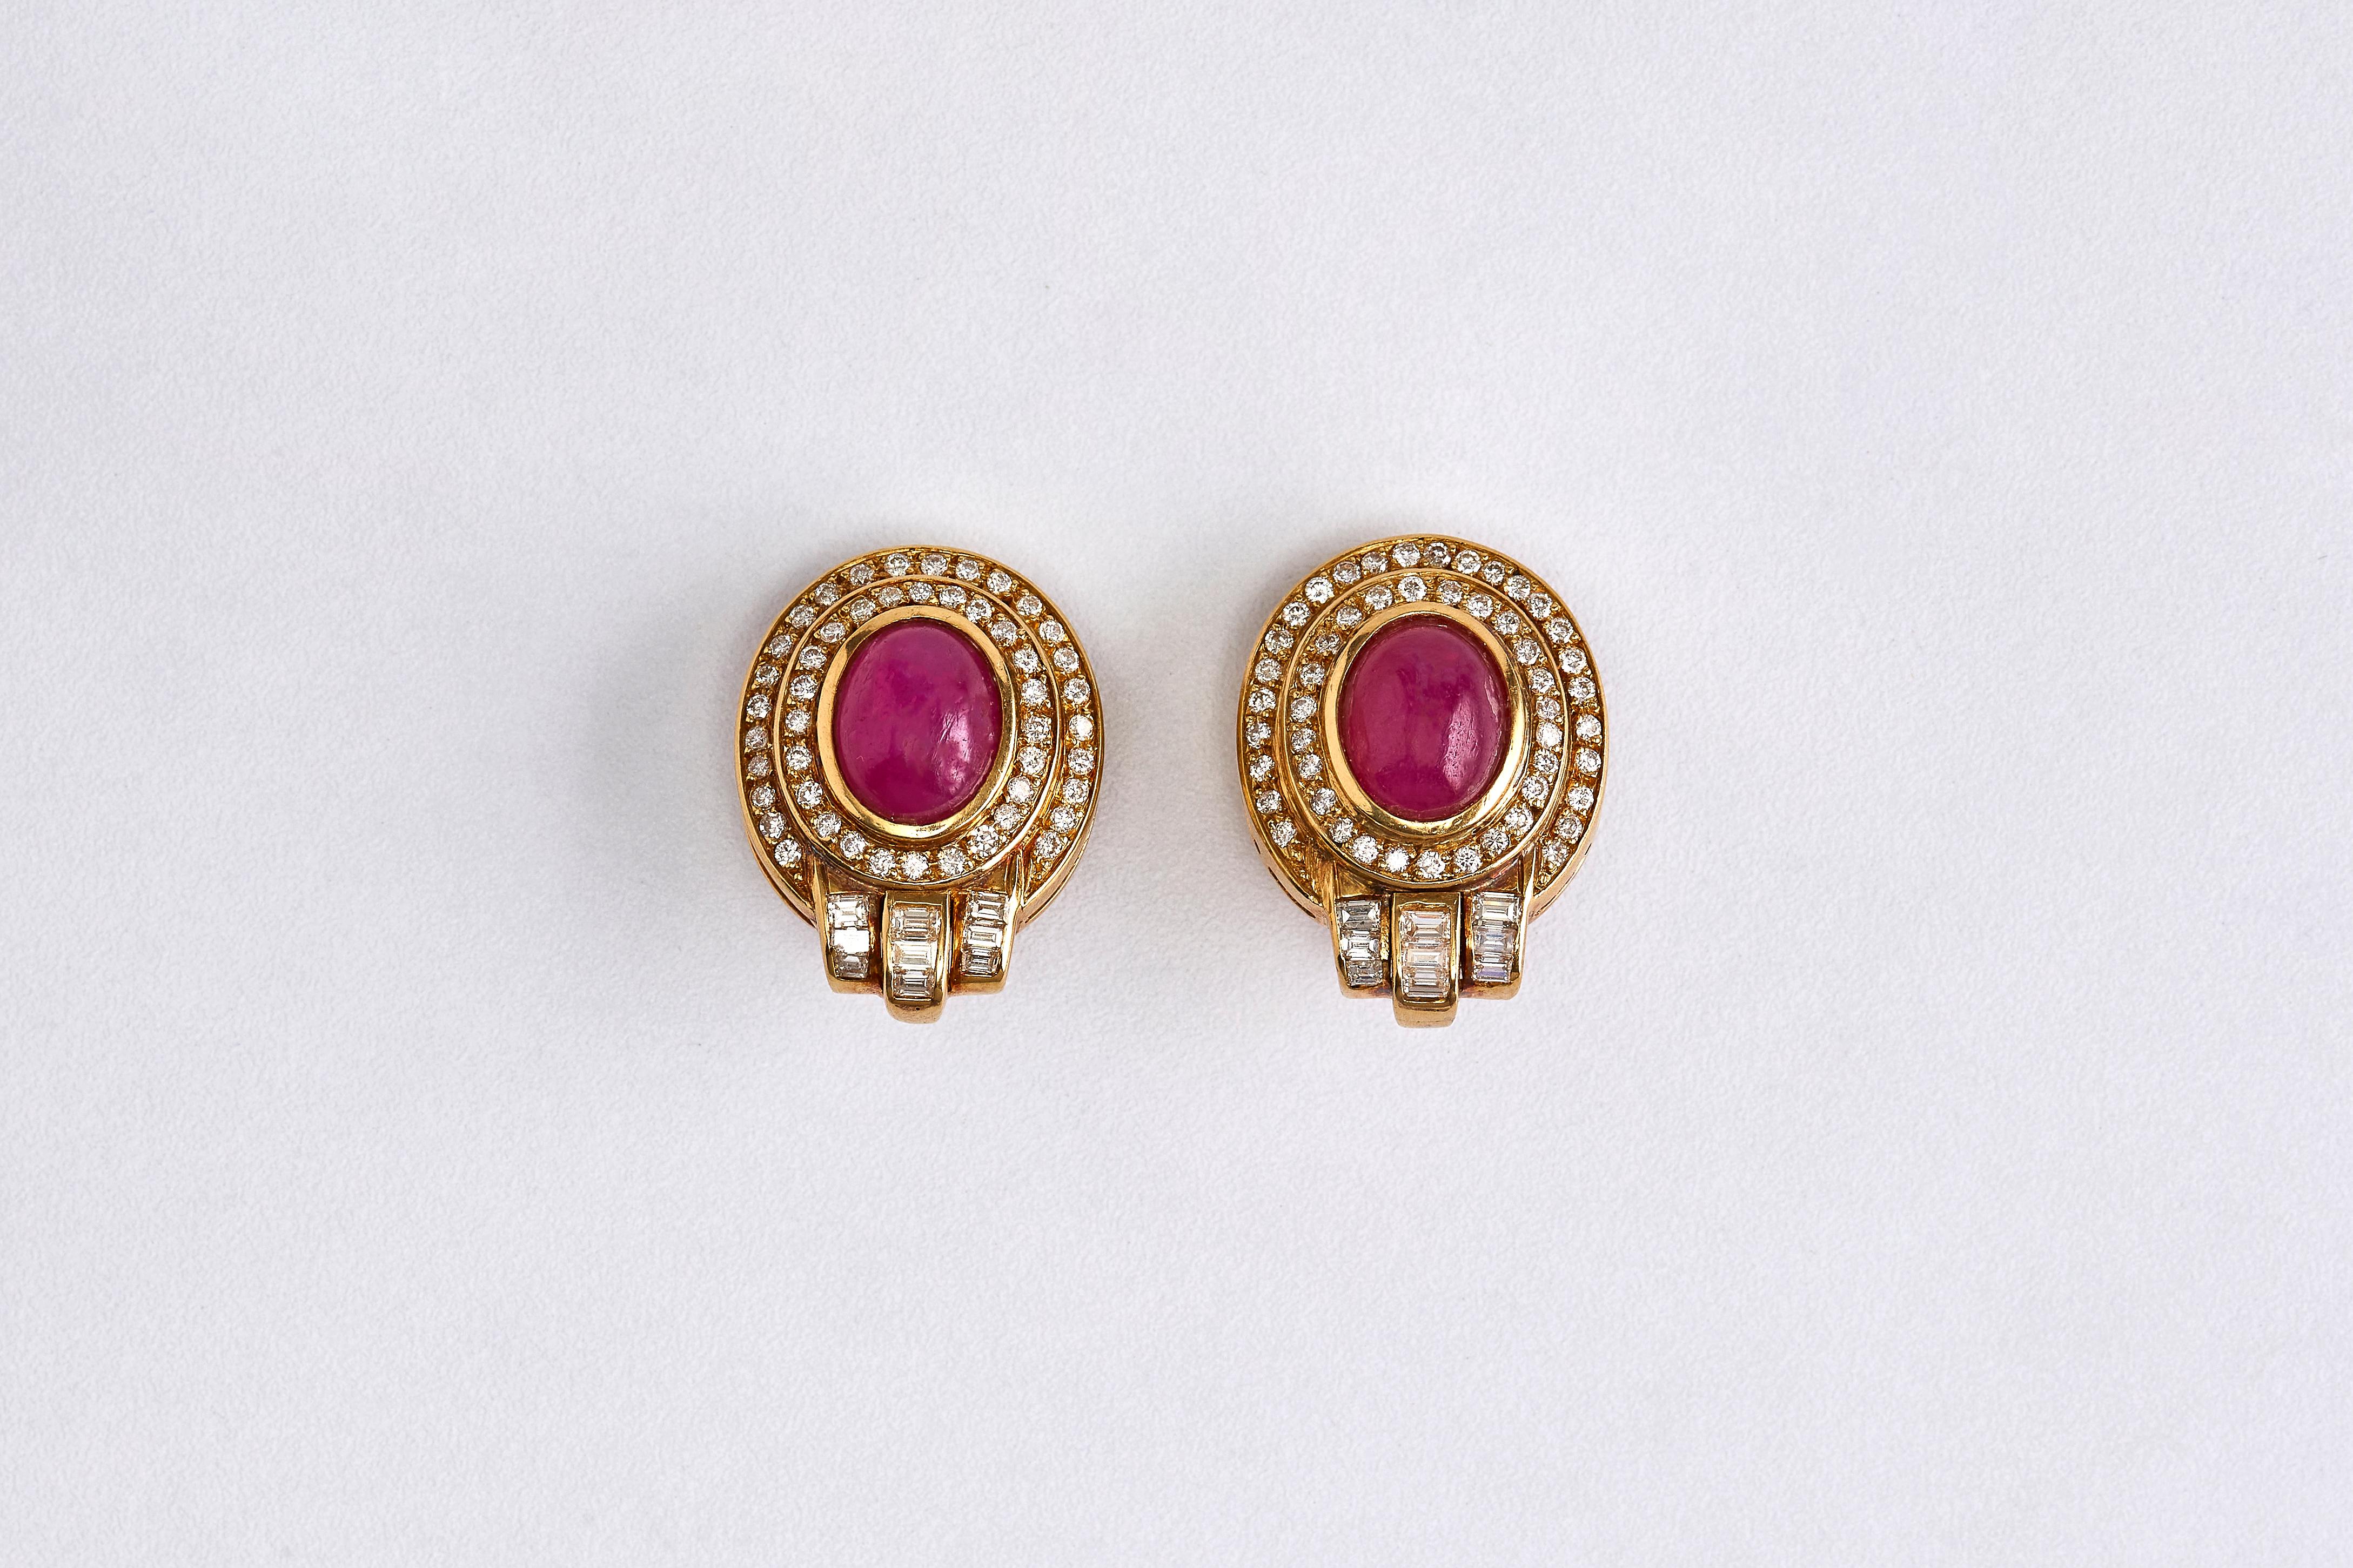 A Set of 14k Gold, Ruby and Diamonds Pendant with Chain and Earrings
Gorgeous Yellow gold earrings and pendant with chain, each is set with Cabochon Ruby. The ruby is a pure transparent red colour.

Pendant Details: Ruby of 13.7 ct. Surrounded by